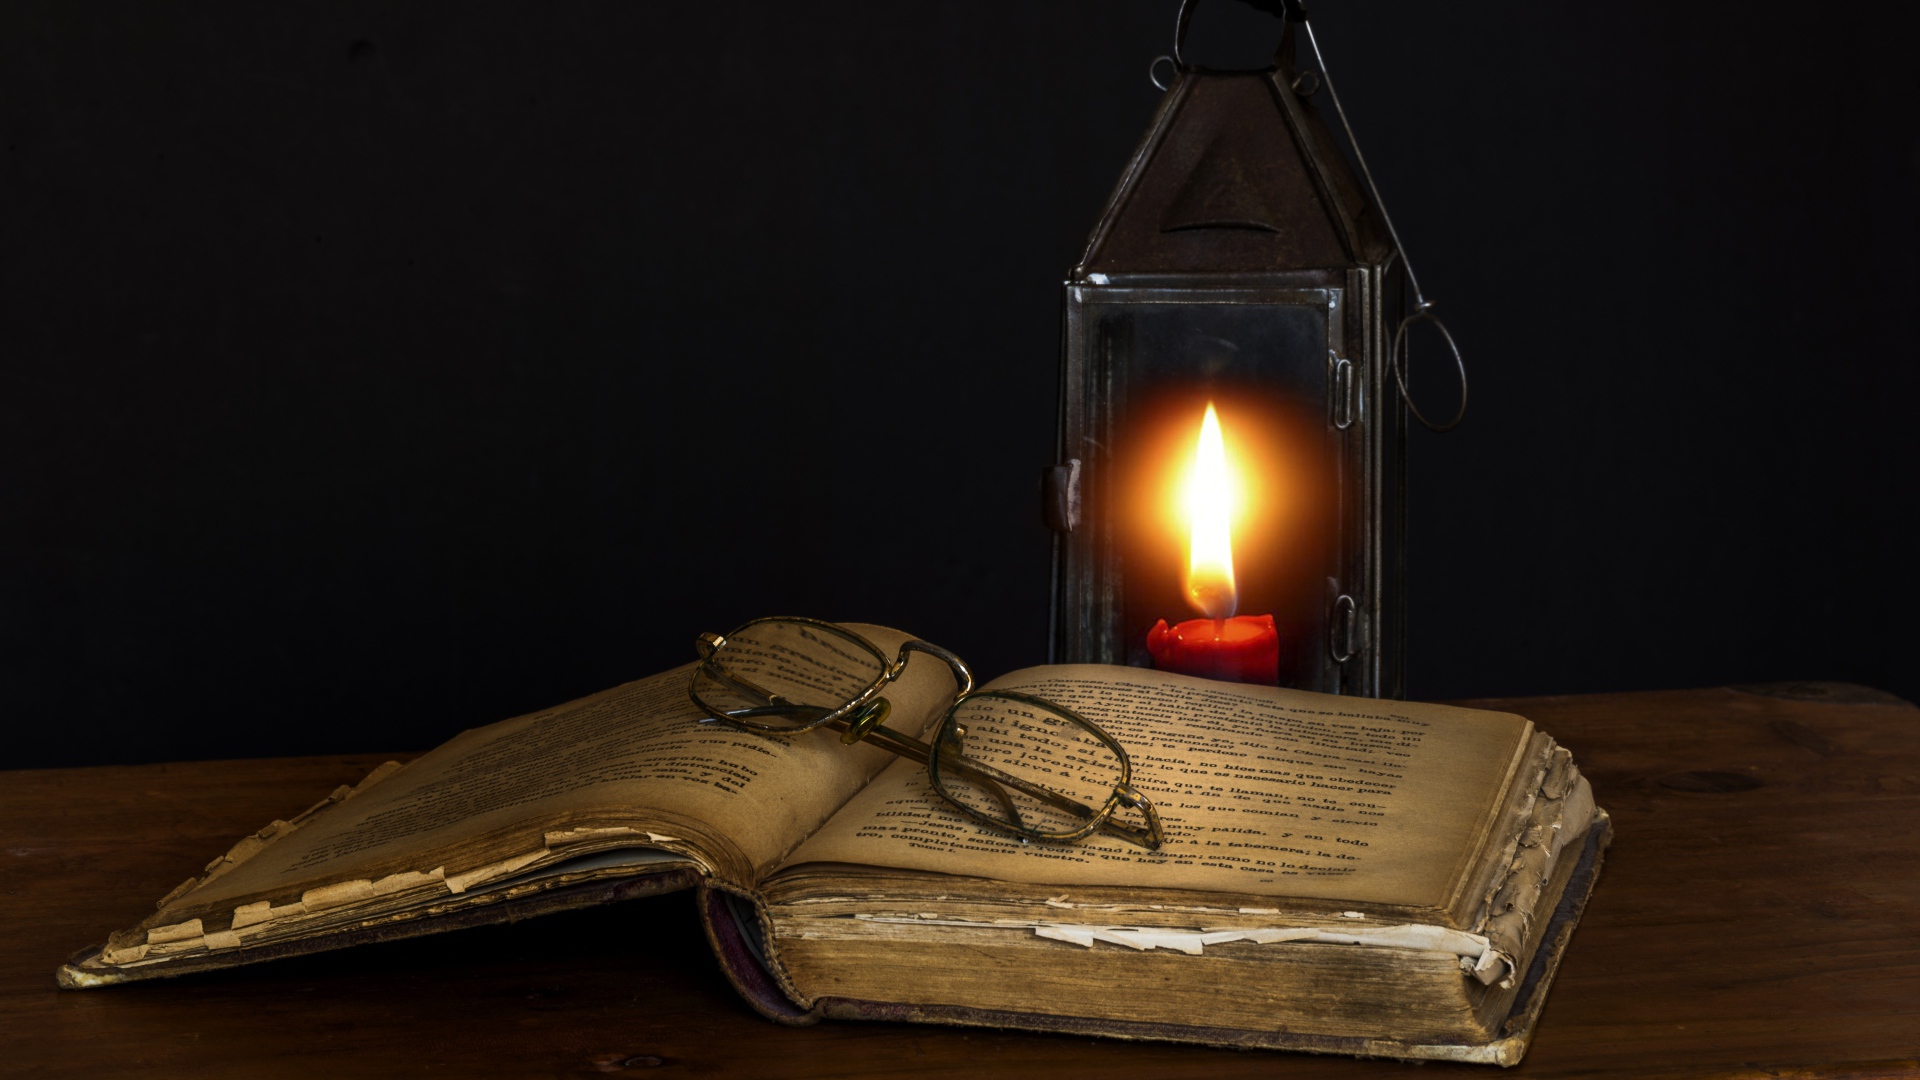 Old book on table with glasses and lamp